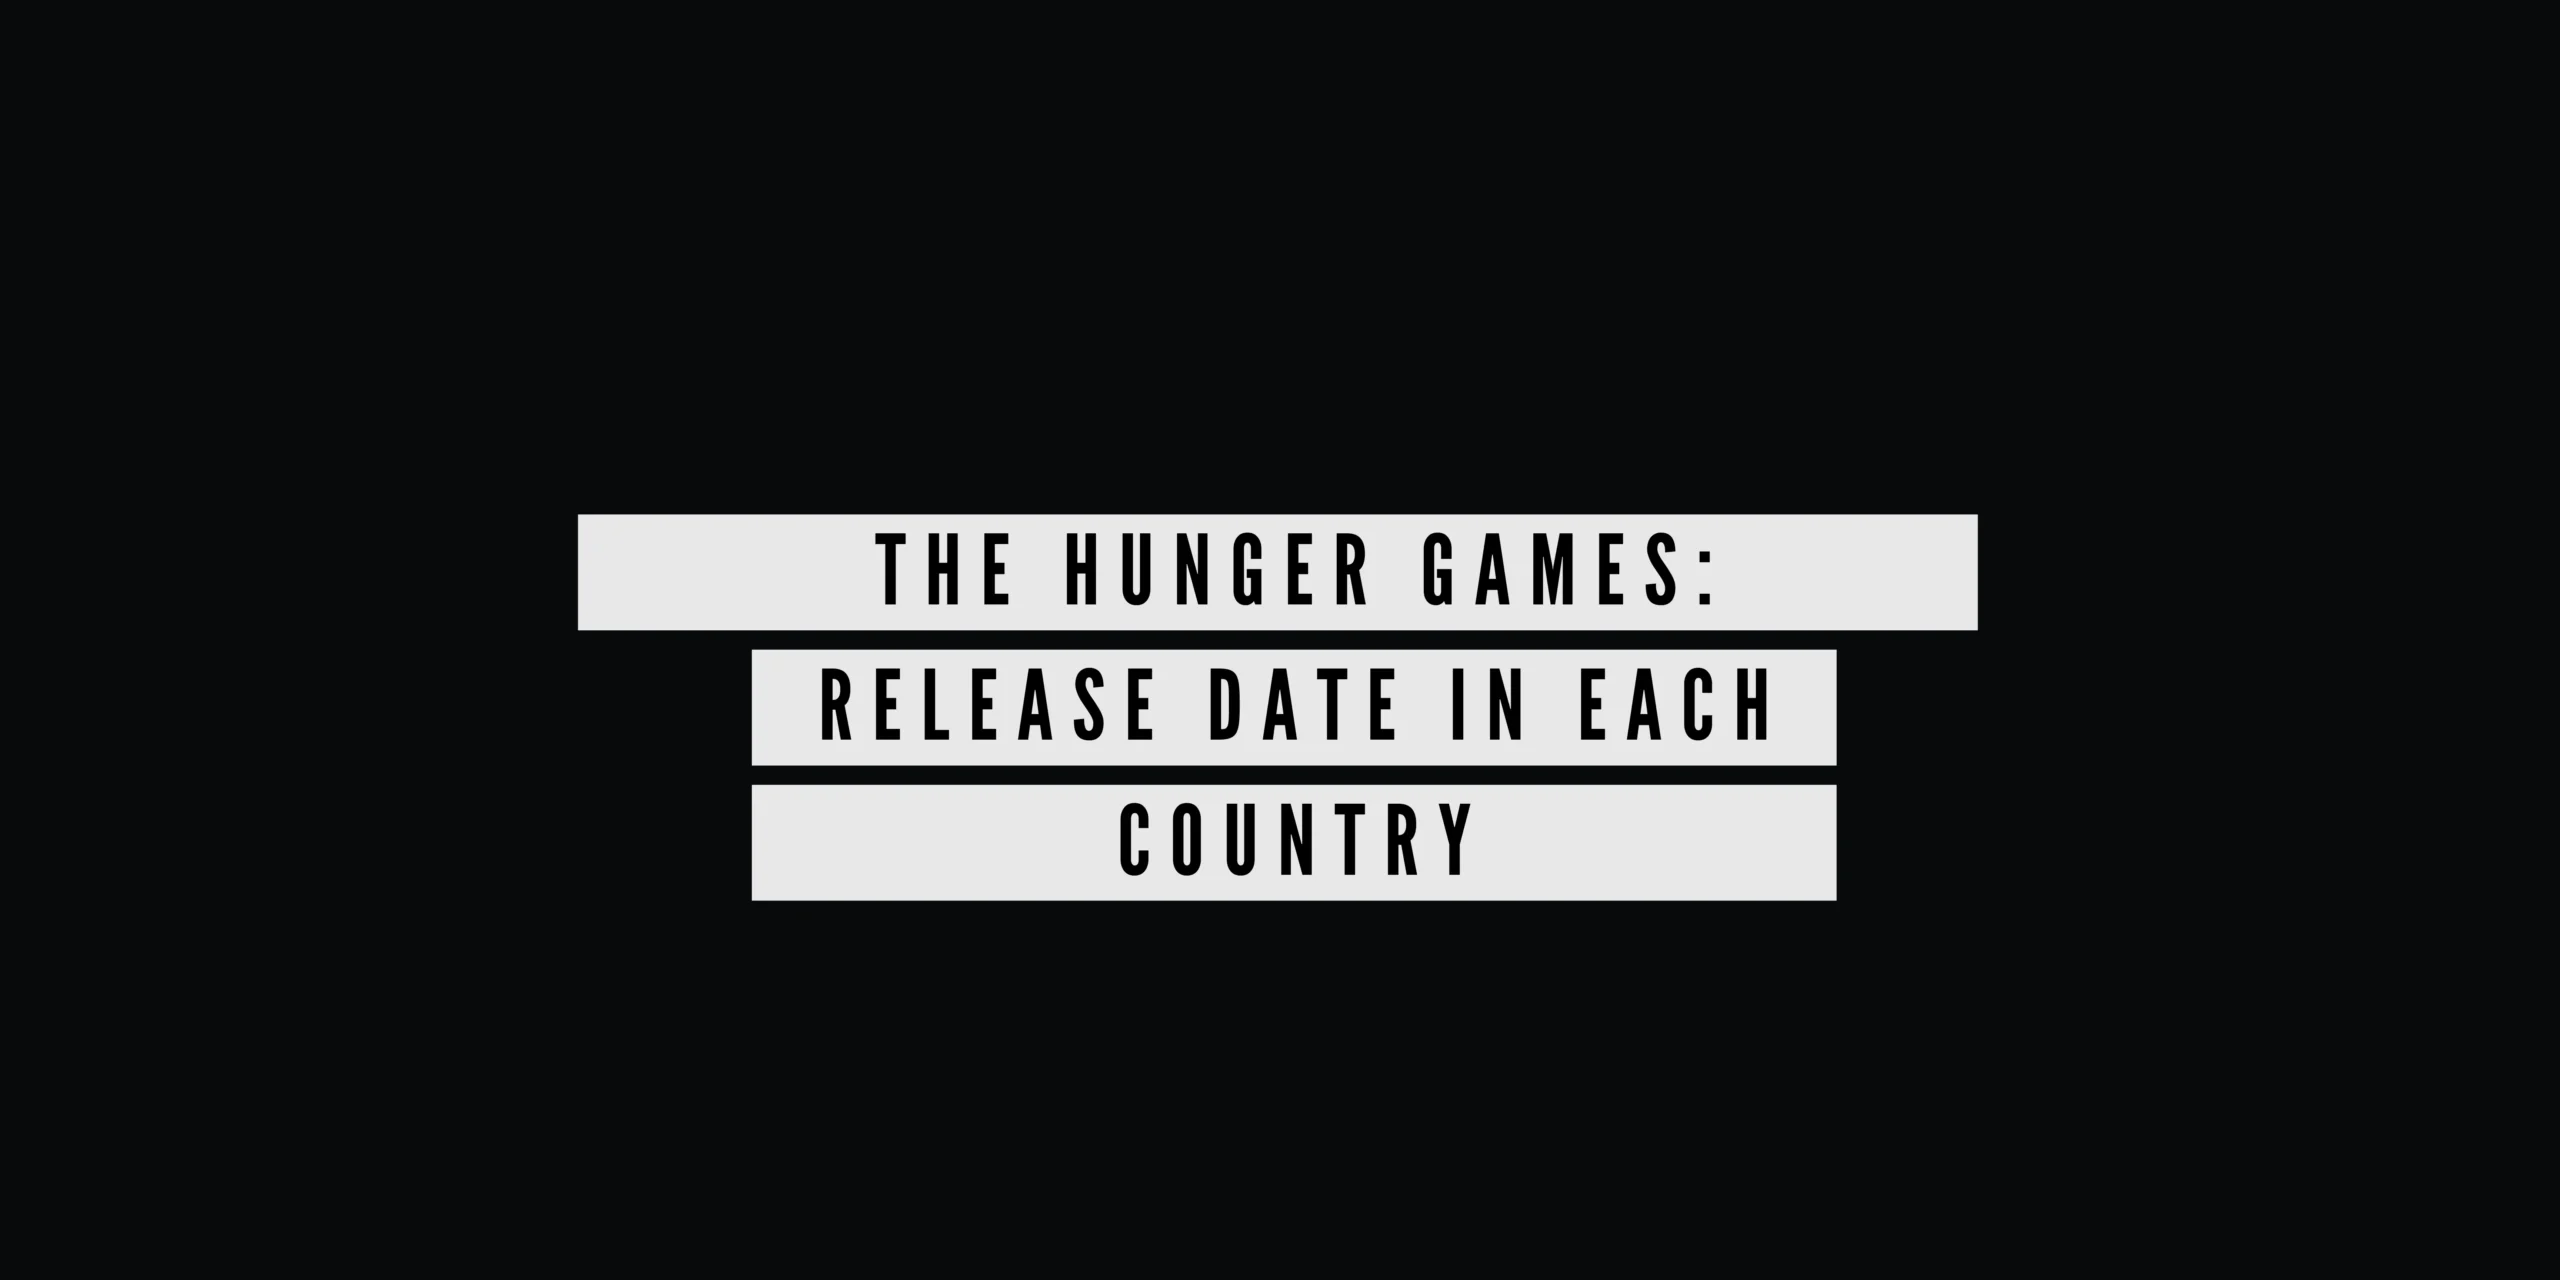 The Hunger Games Release Date In Each Country